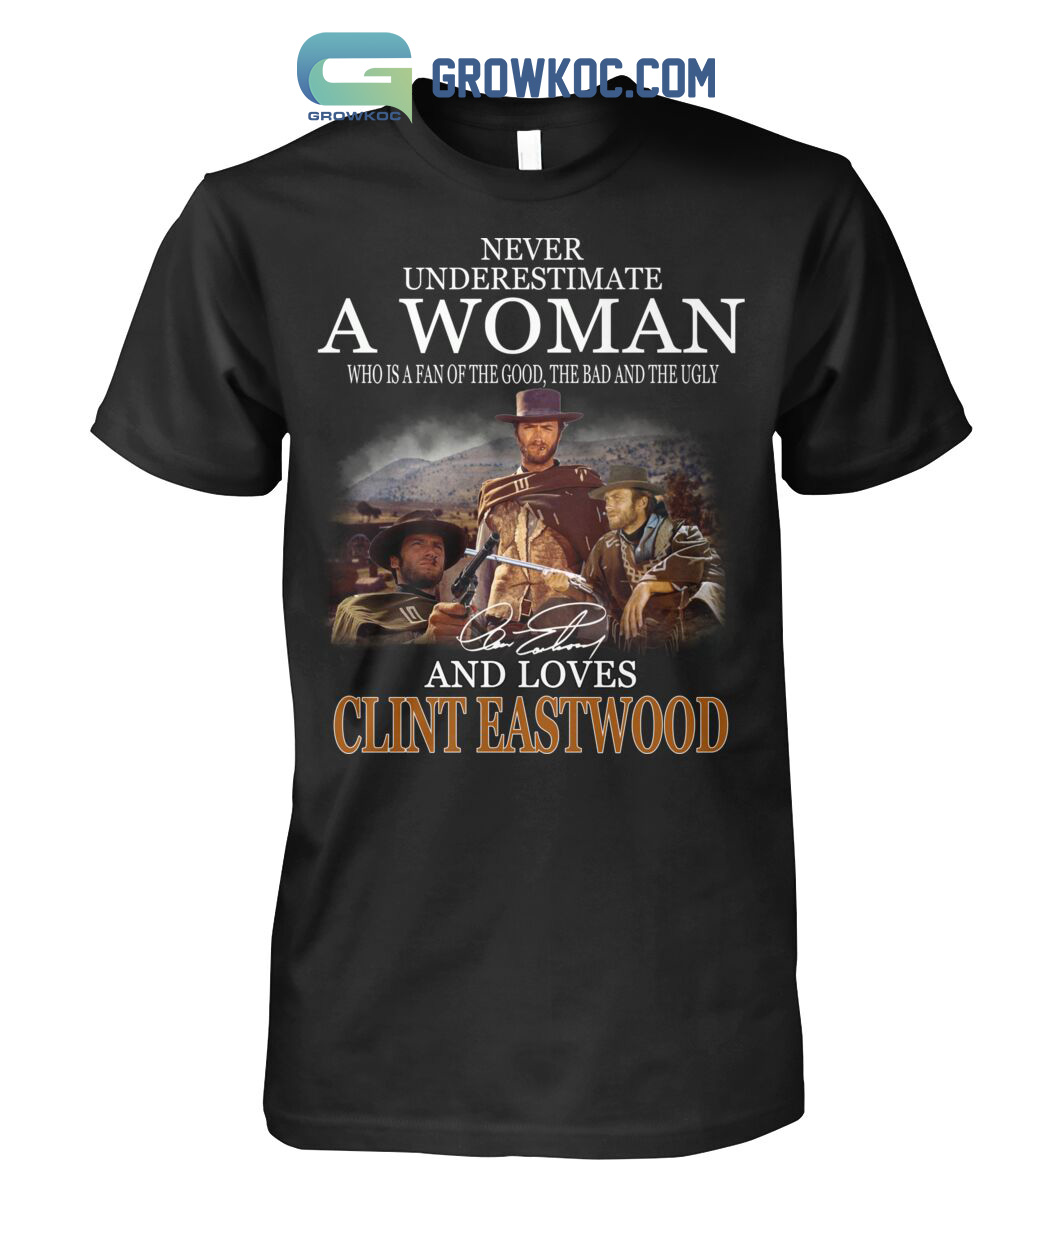 Never Underestimate A Woman Who Is A Fan Of The Good, The Bad And The Ugly And Loves Clint Eastwood T-Shirt